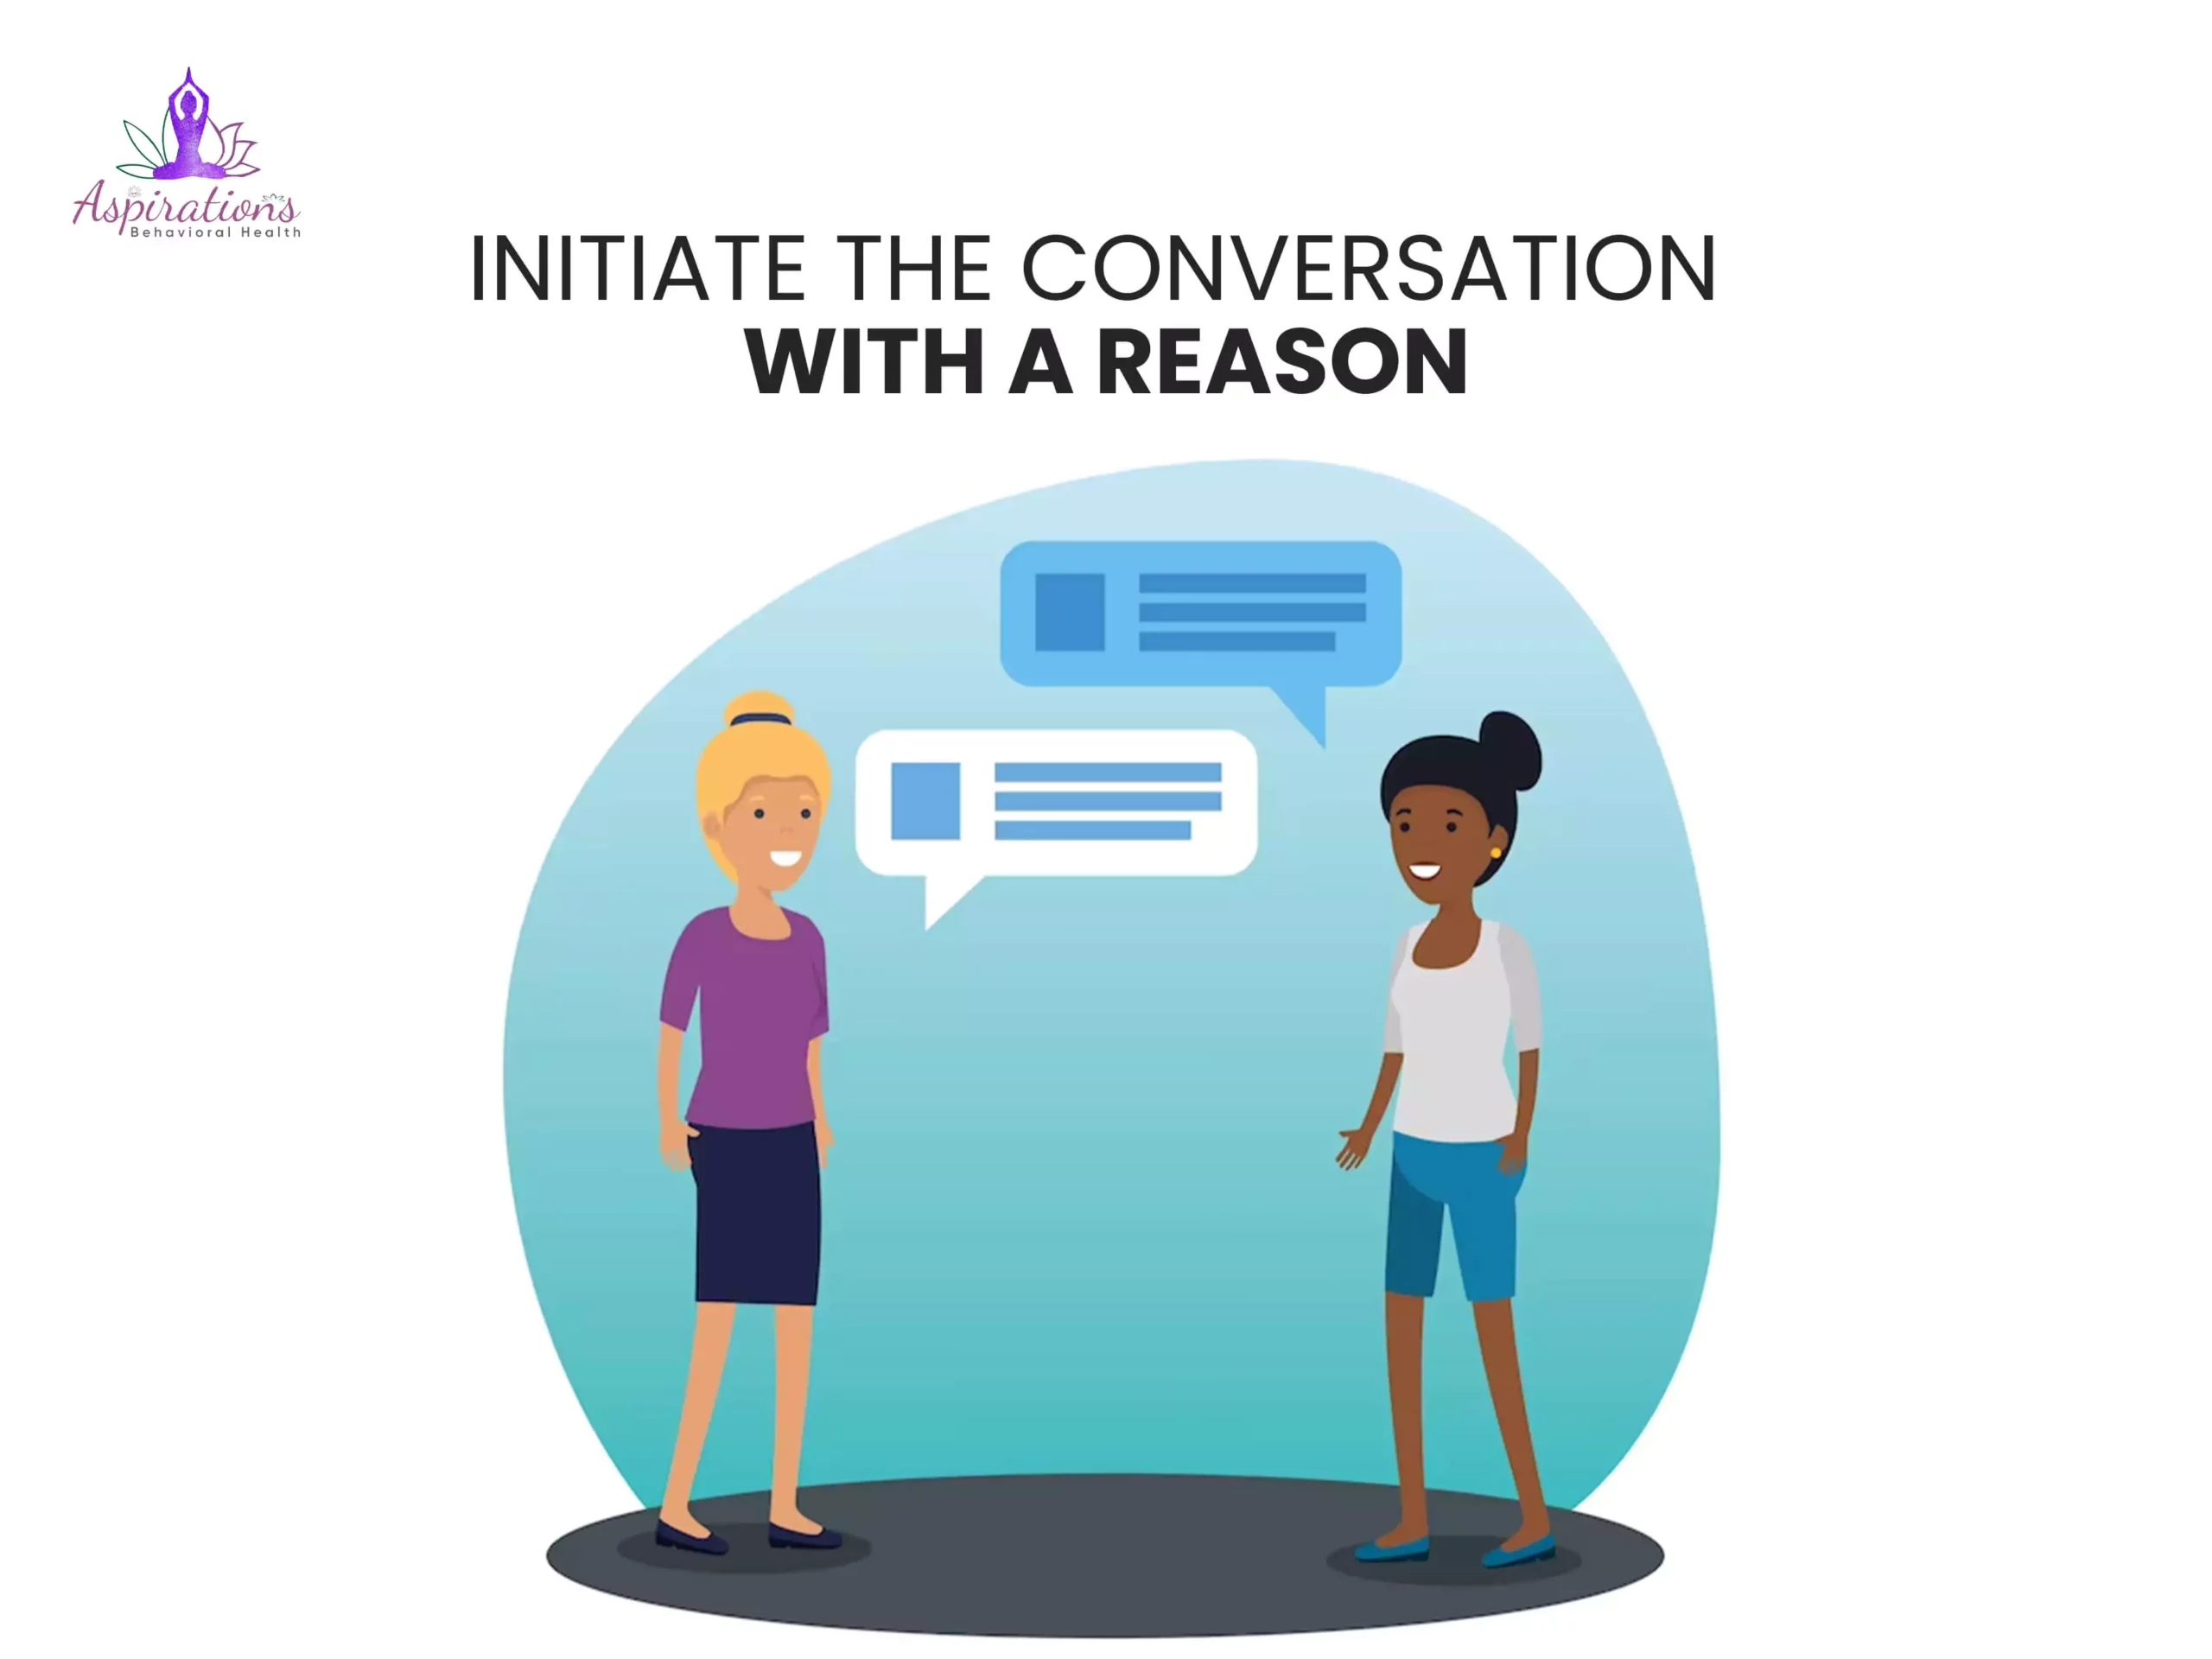 Initiate the Conversation with a Reason: